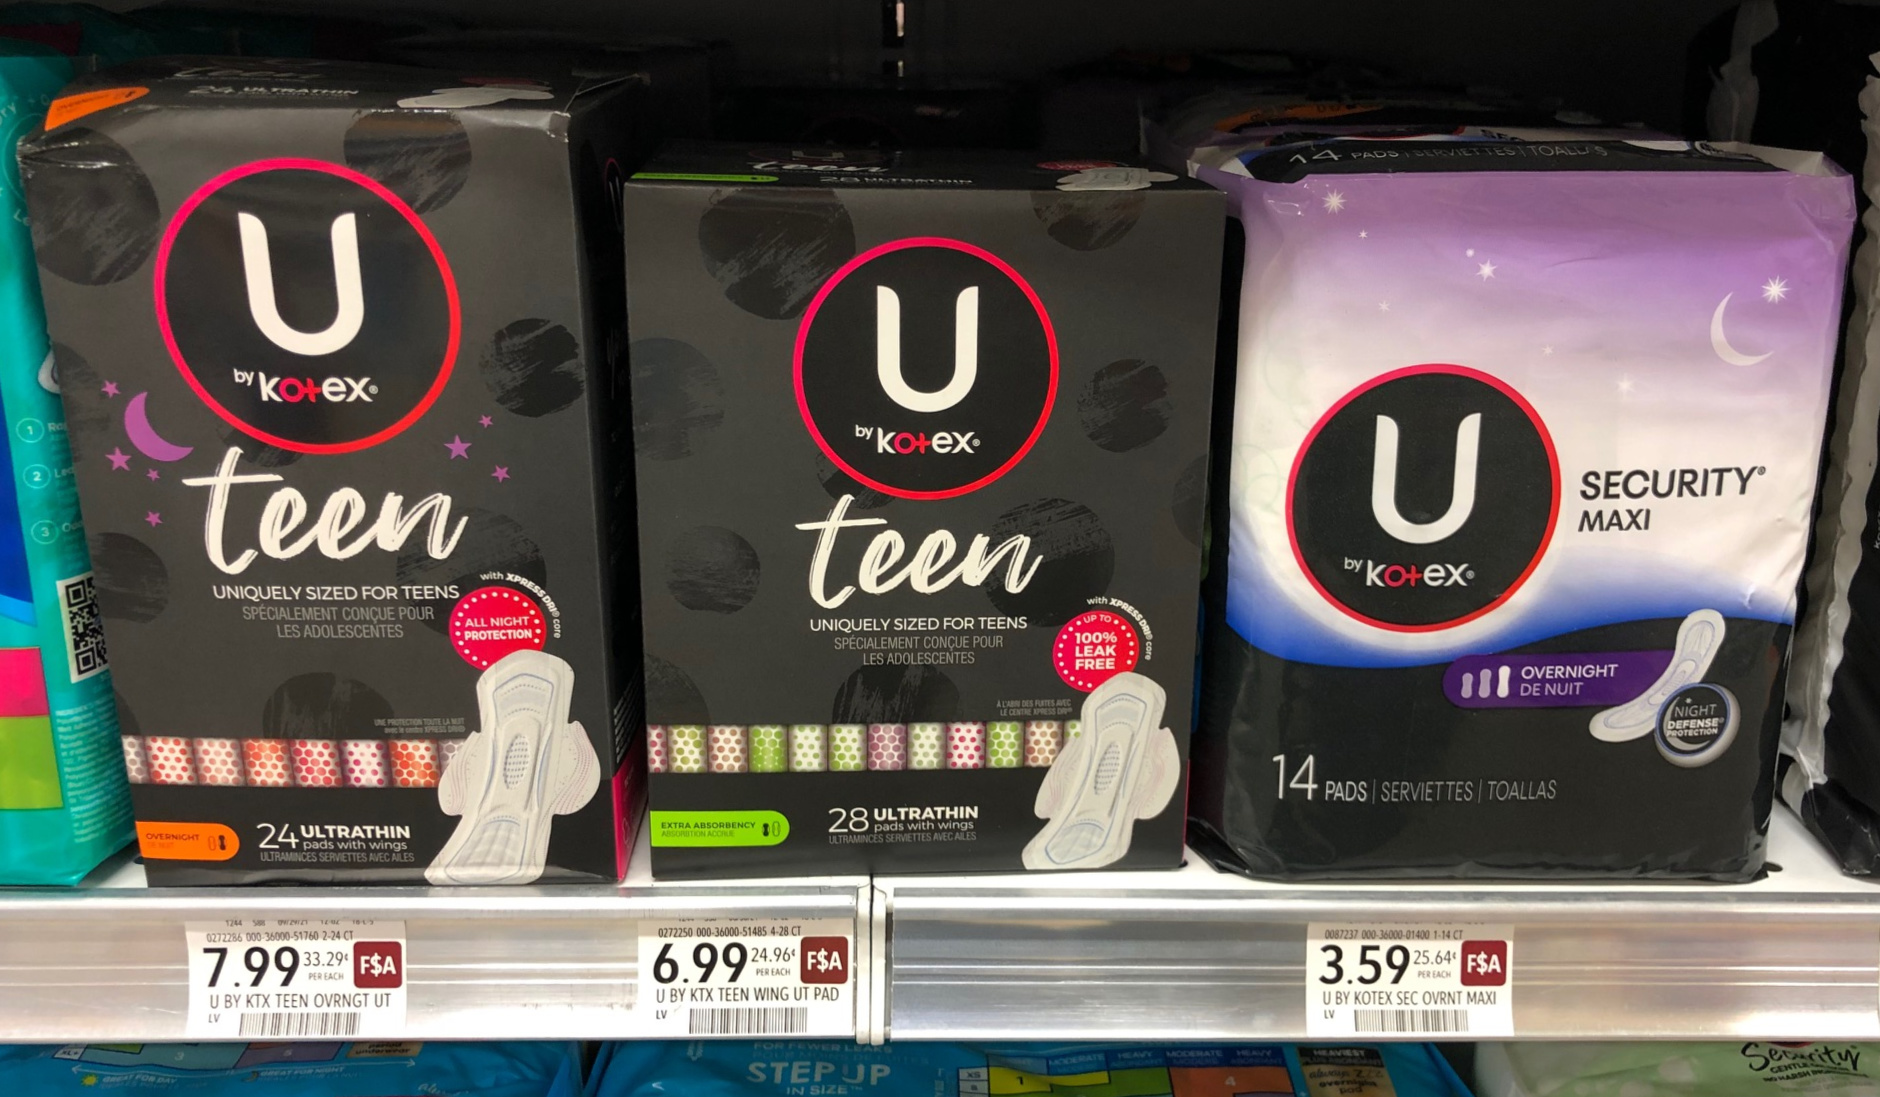 U By Kotex Pads, Tampons or Liners As Low As 50¢ At Publix on I Heart Publix 1